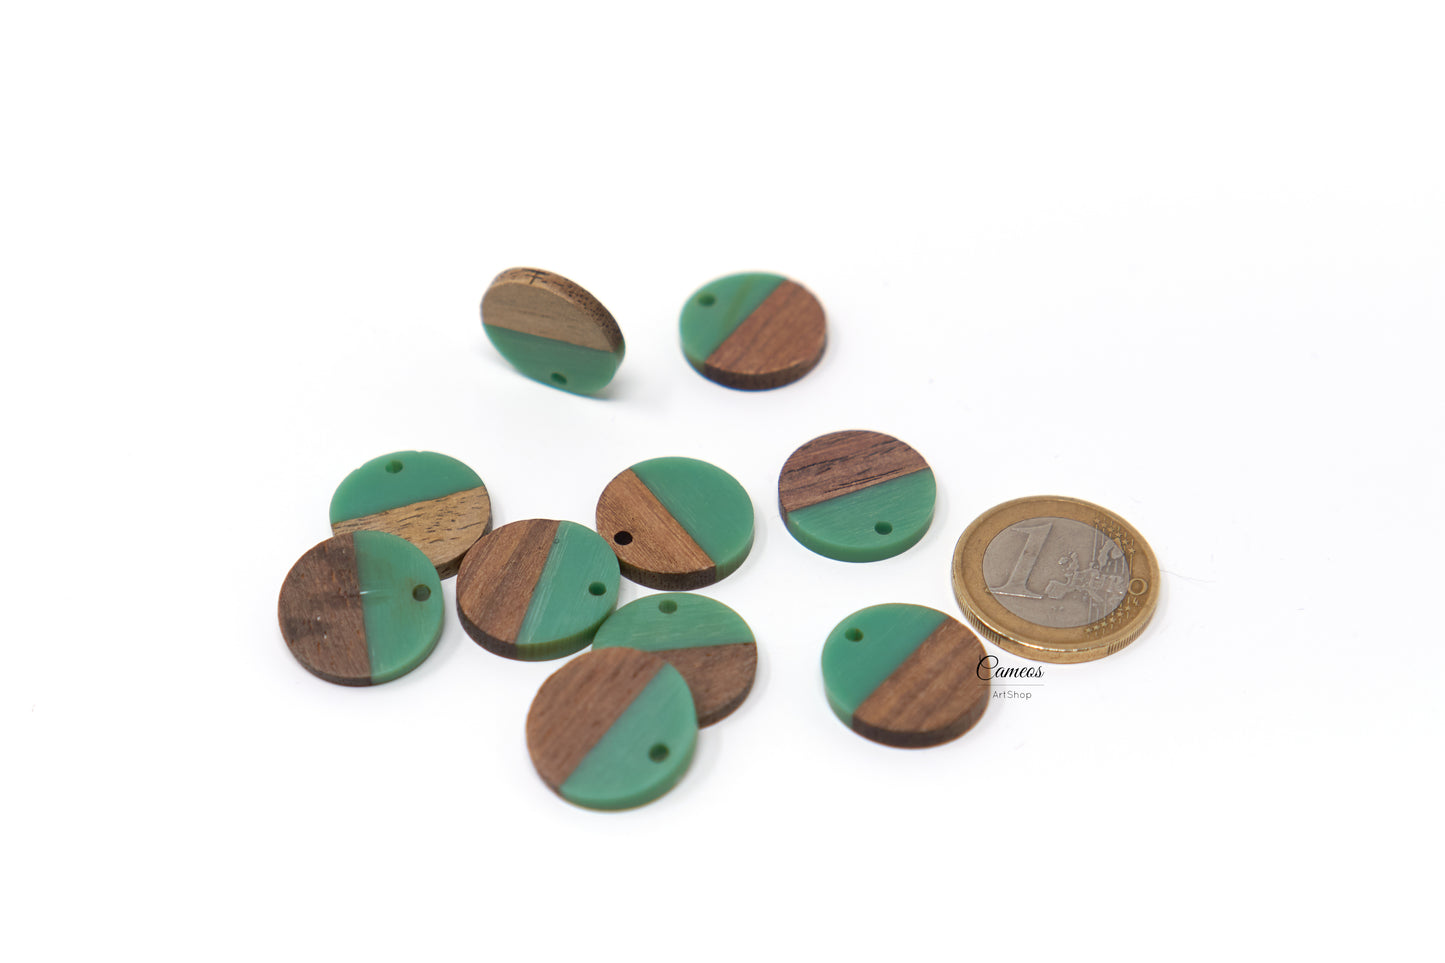 4 pcs Small Wood Resin Pendant, Round Wooden Charms, Real wood, Flat Round Pendant Earring Charm, 18mm, Light Sea Green